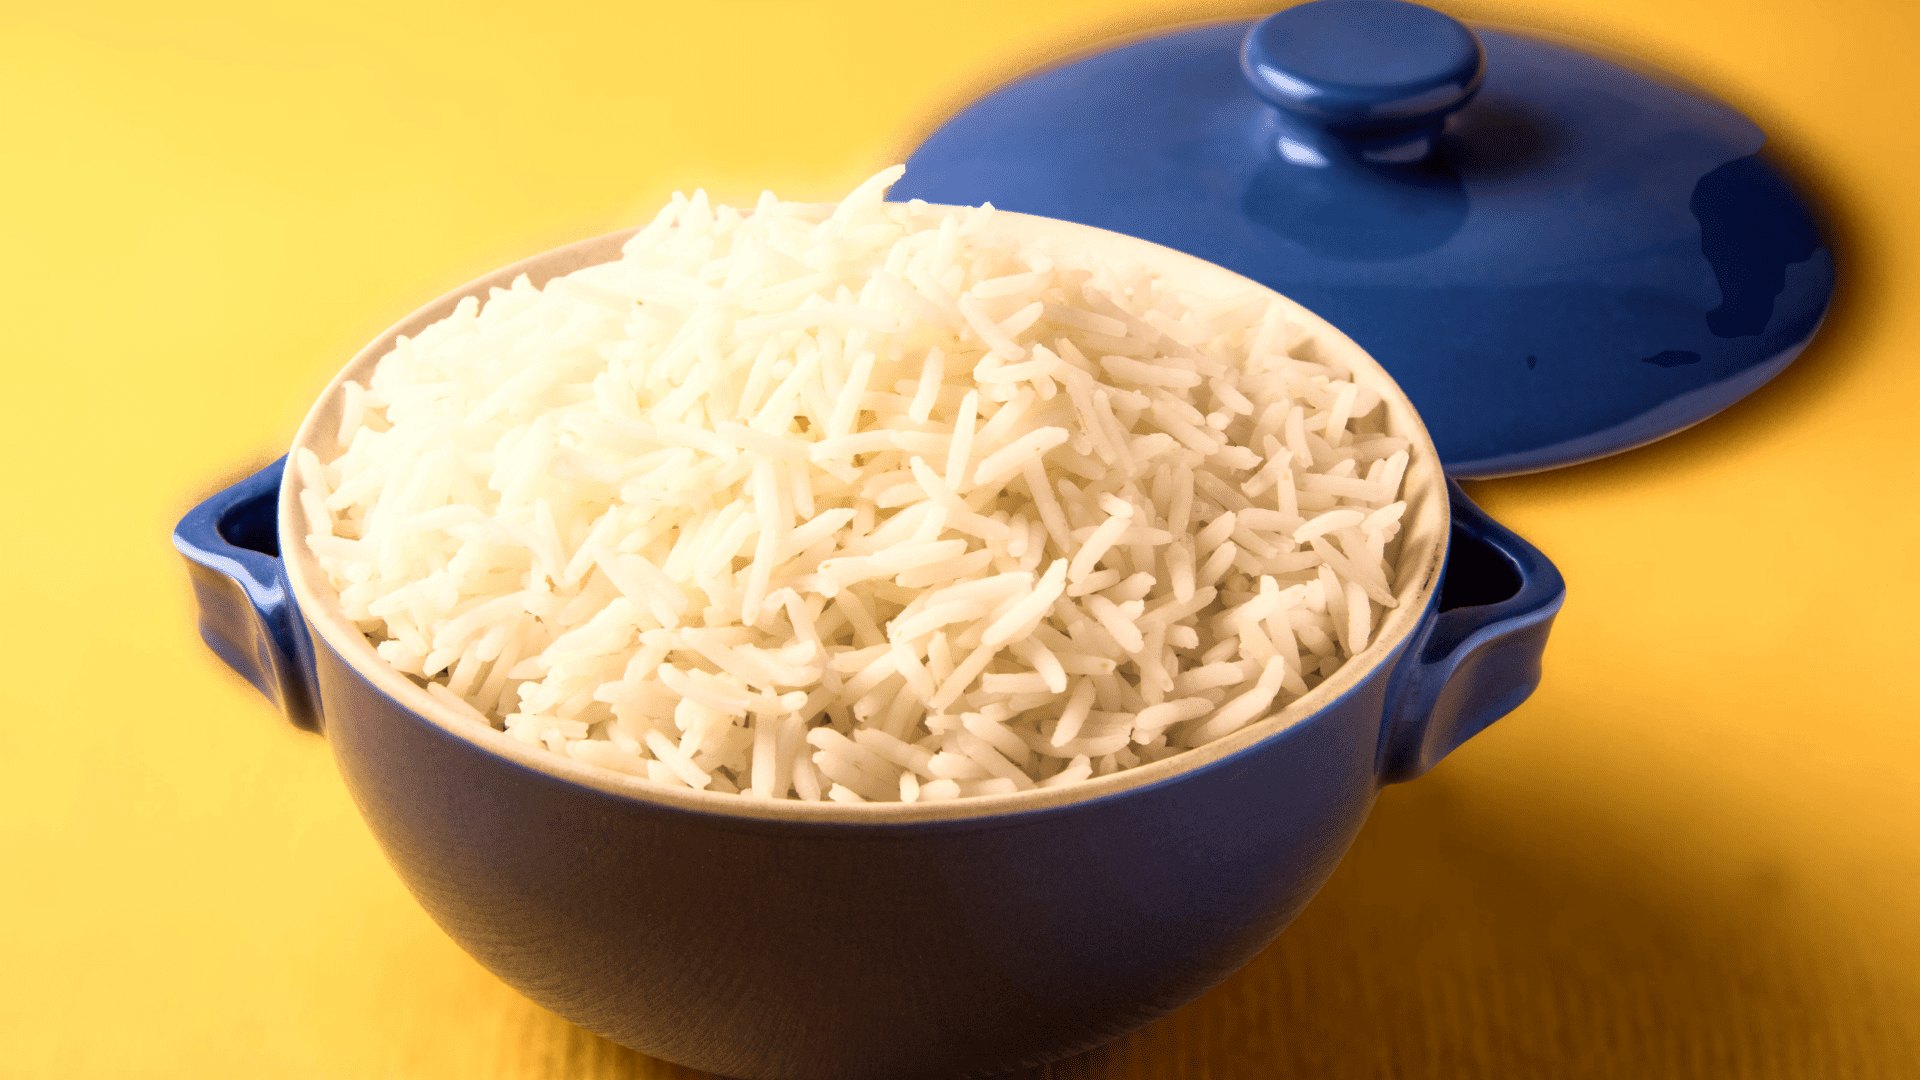 Best rice cooker for basmati rice | Top 5 to cook long-grain to perfection